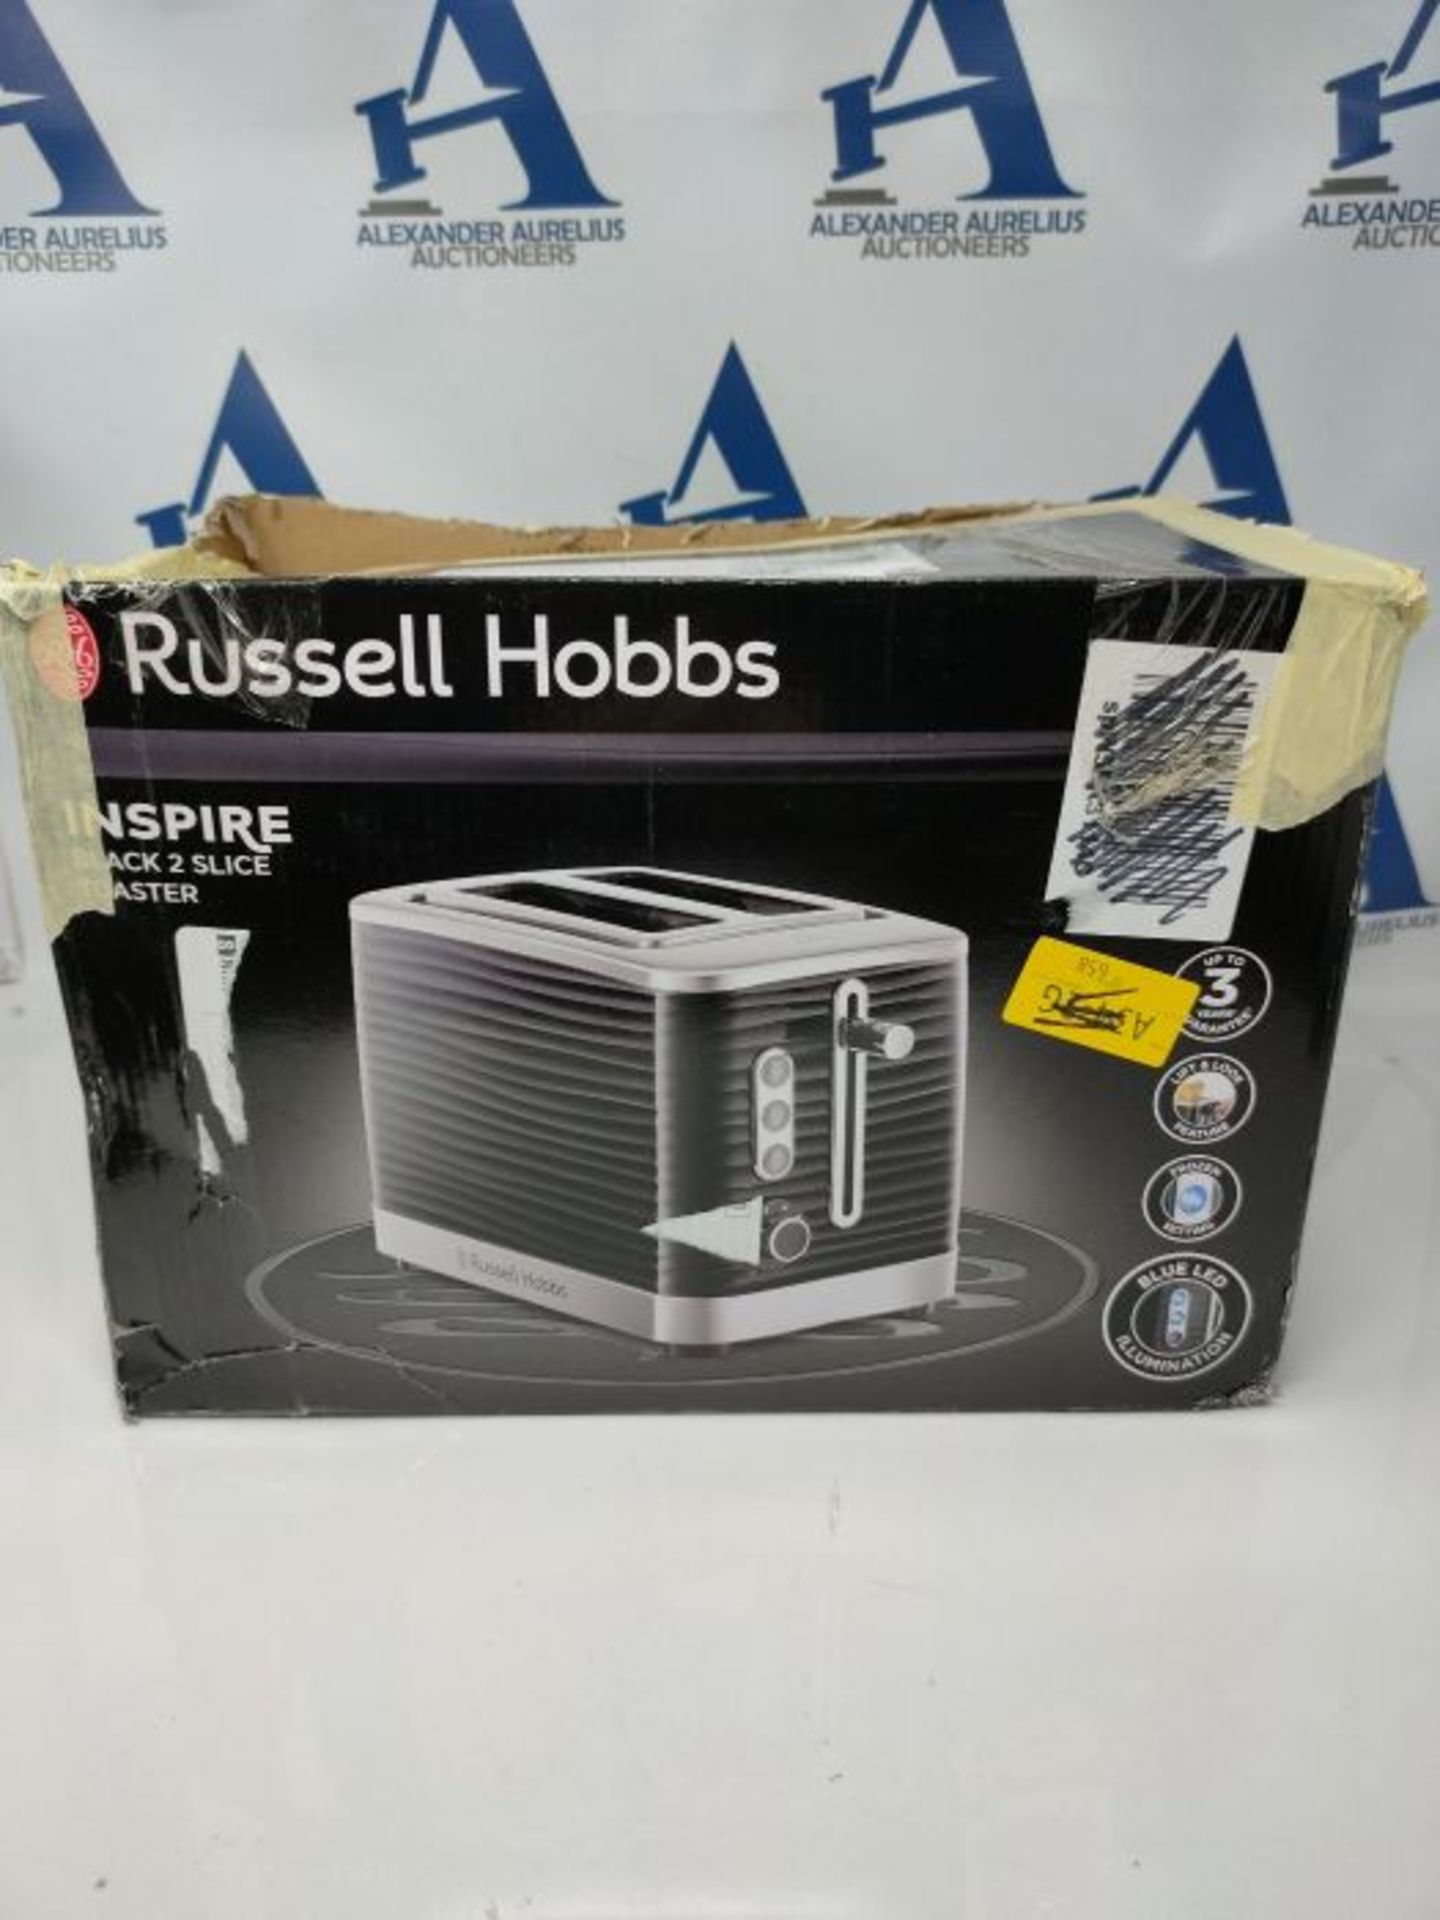 Russell Hobbs 24371 Inspire High Gloss Plastic Two Slice Toaster, Black - Image 2 of 3